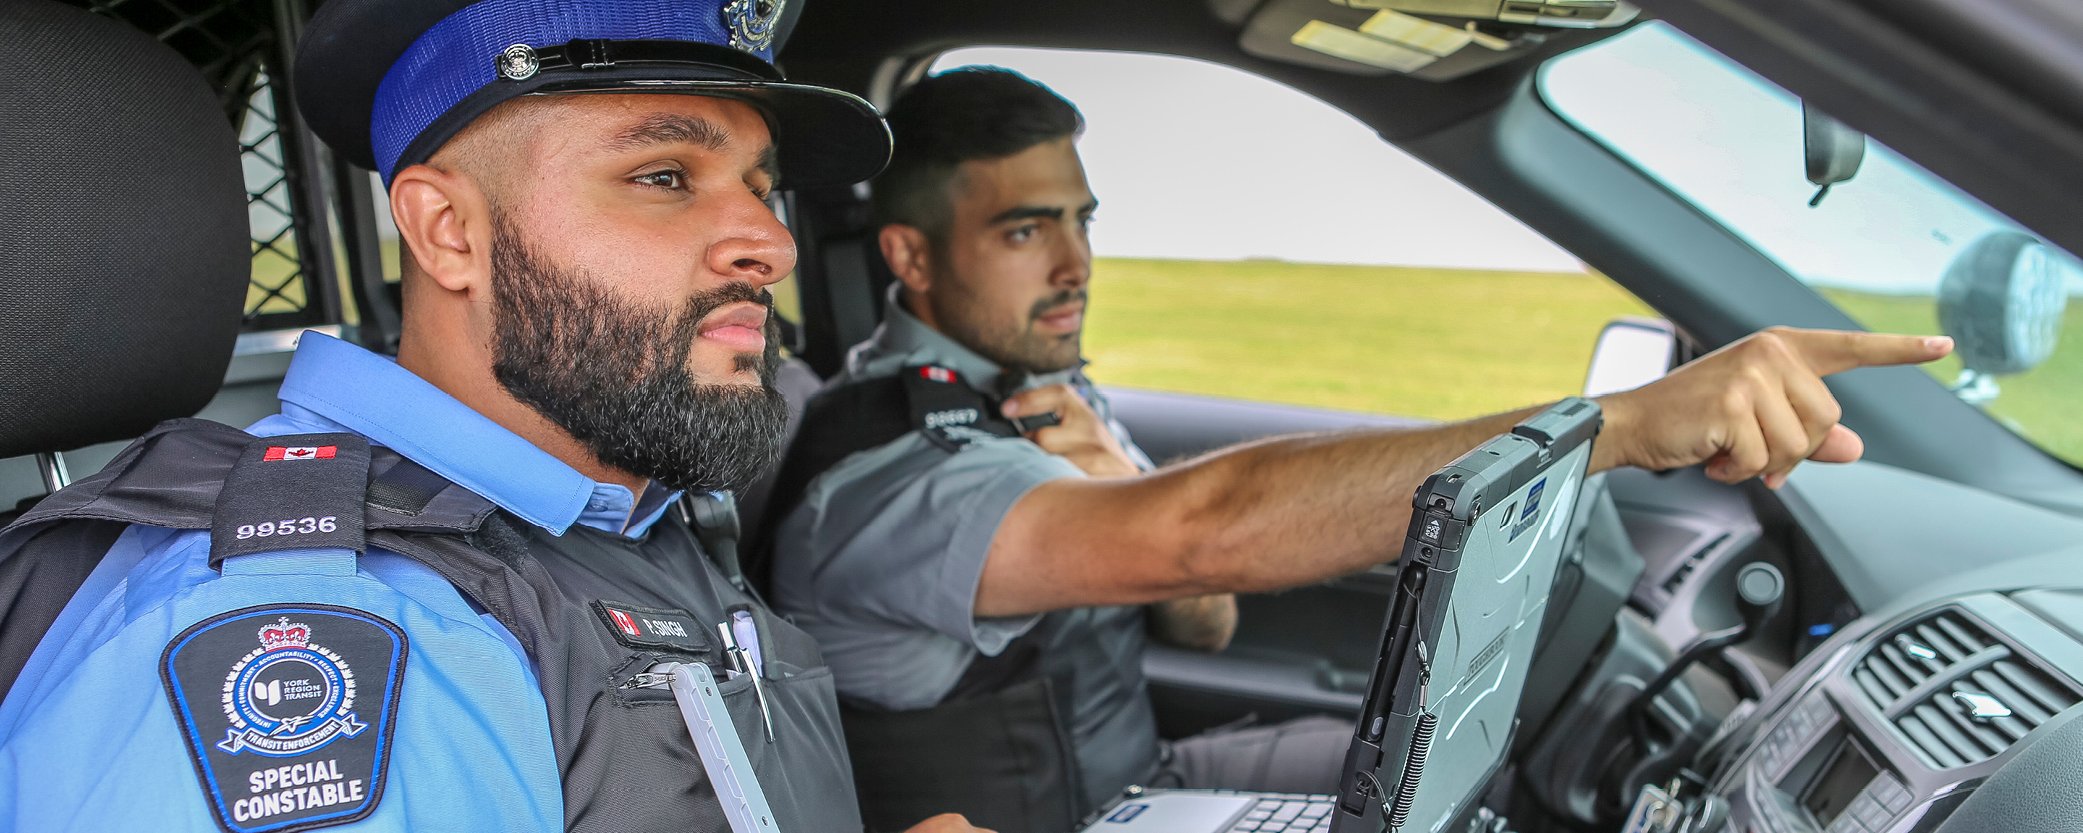 image of two transit enforcement officer inside a vehicle